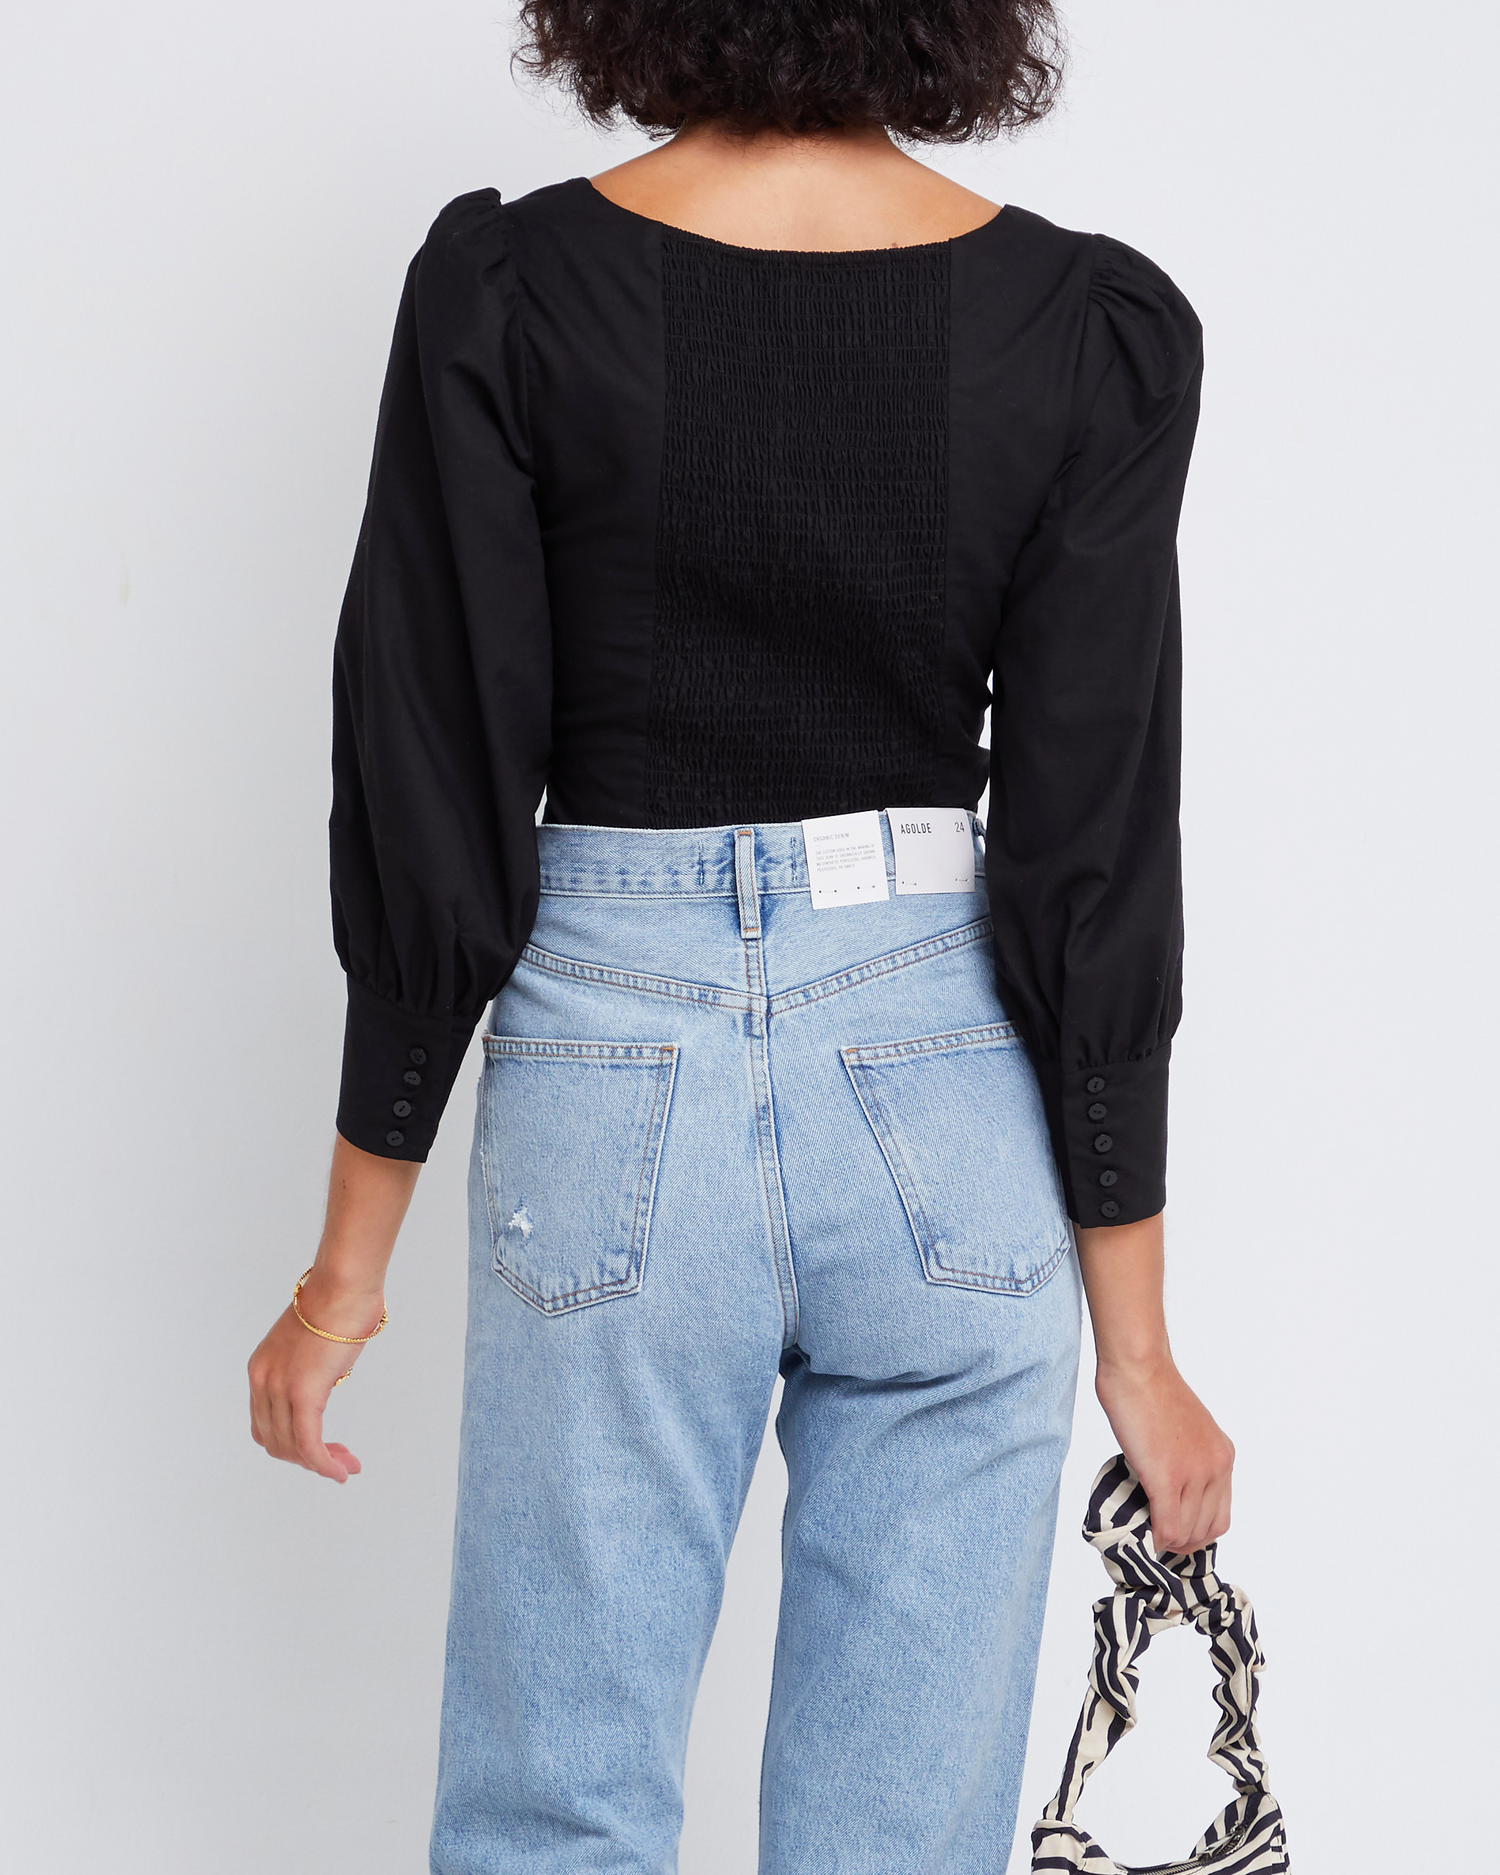 Second image of Sipora Top, a black puff sleeve top, long sleeve, puff sleeve, square neckline